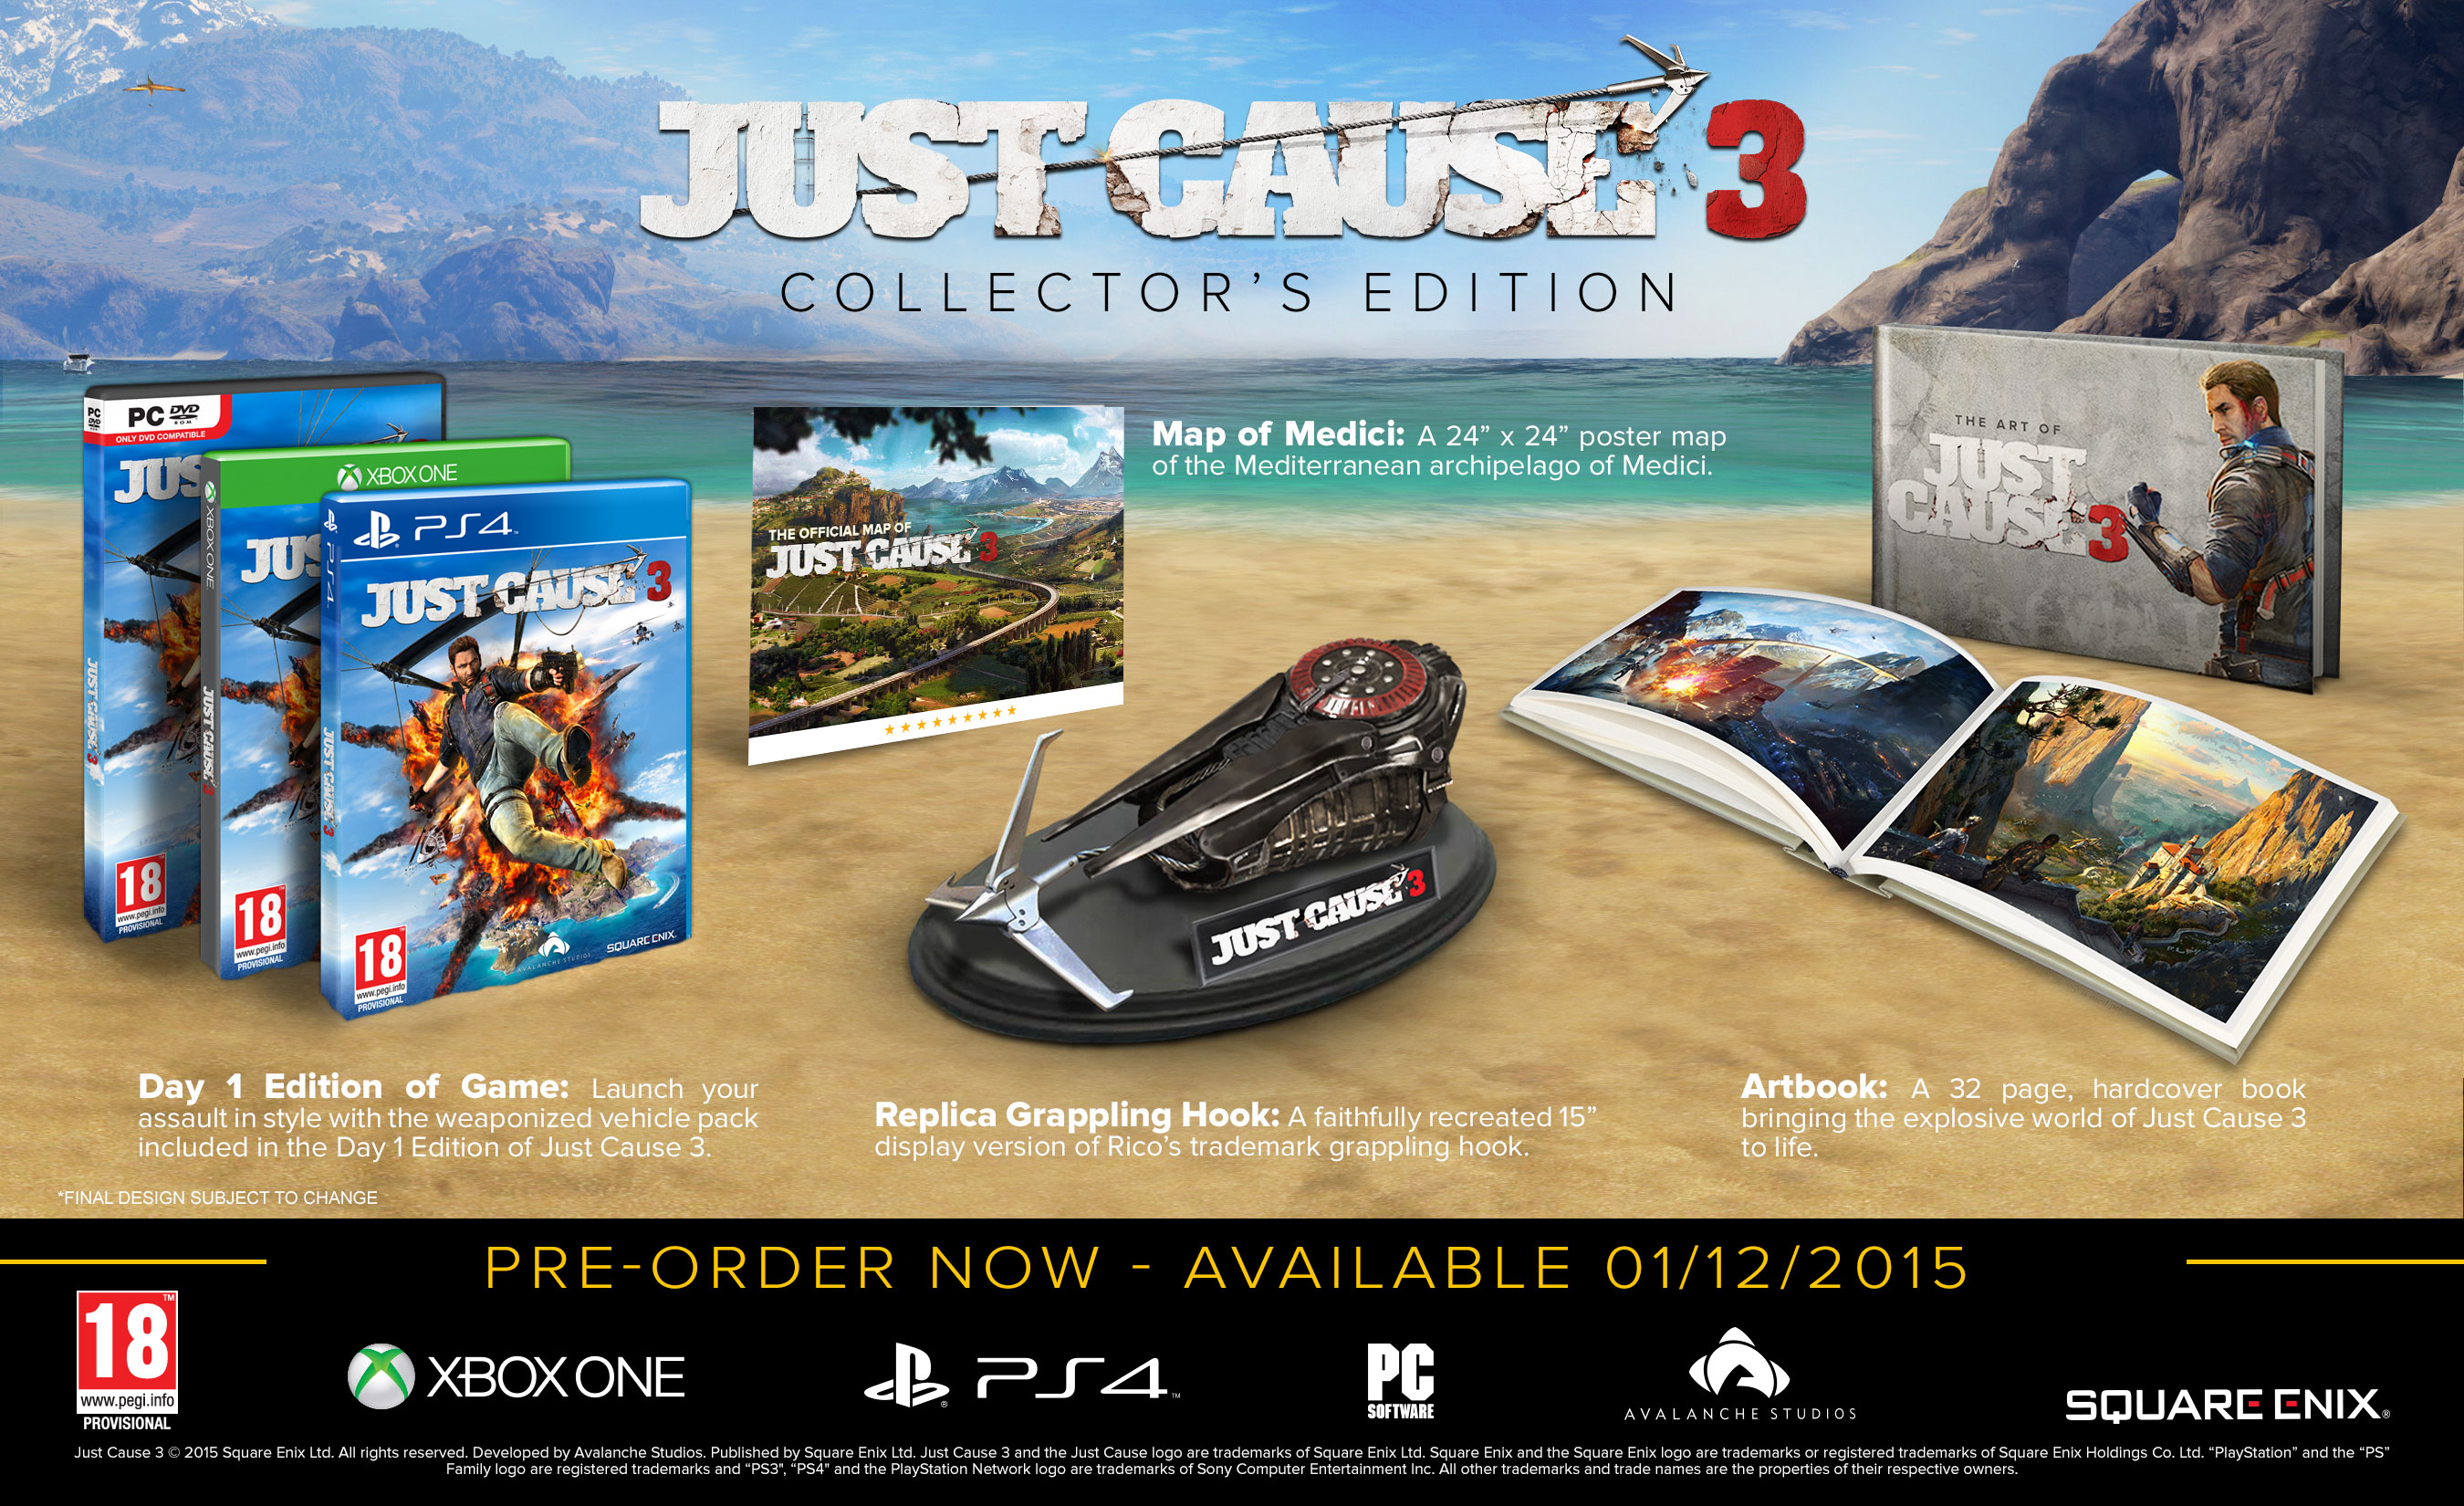 “Just Cause 3” Collector’s Edition Revealed - Disclaimer: Grappling Hook Won't Let You Become Batman